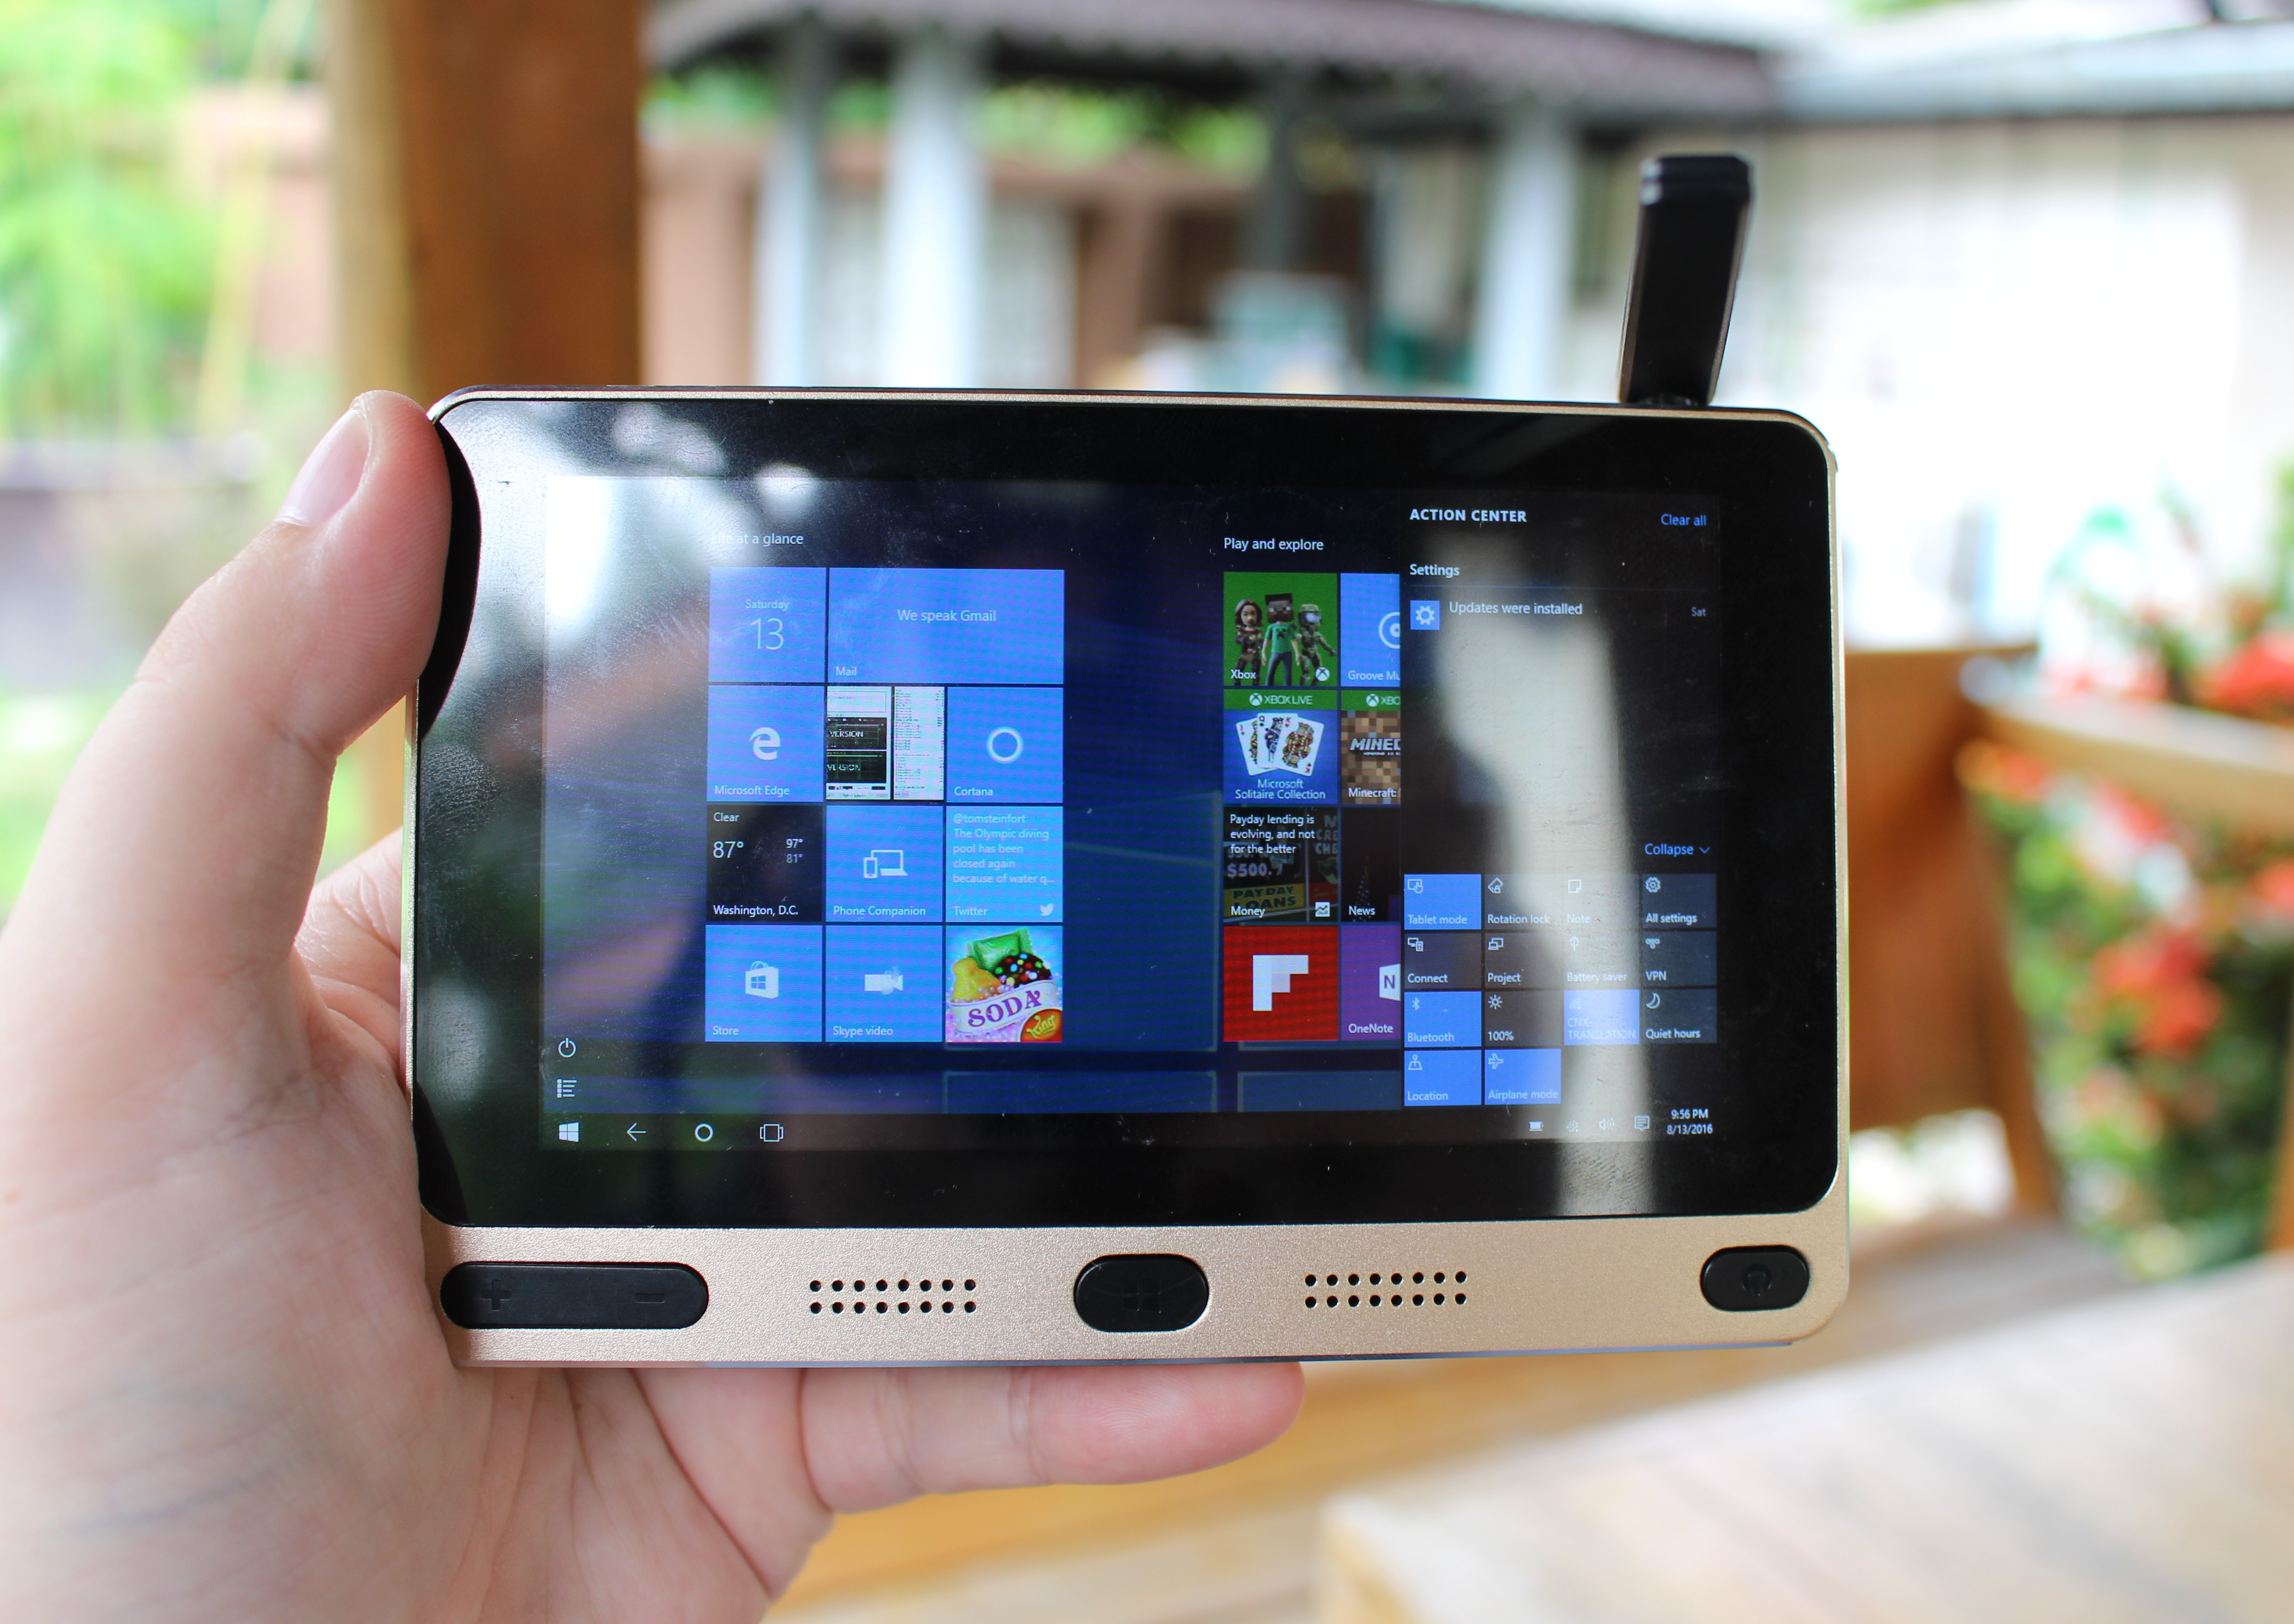 GOLE1 mini PC Tablet Review – Part 2: Android 5.1 and Windows 10